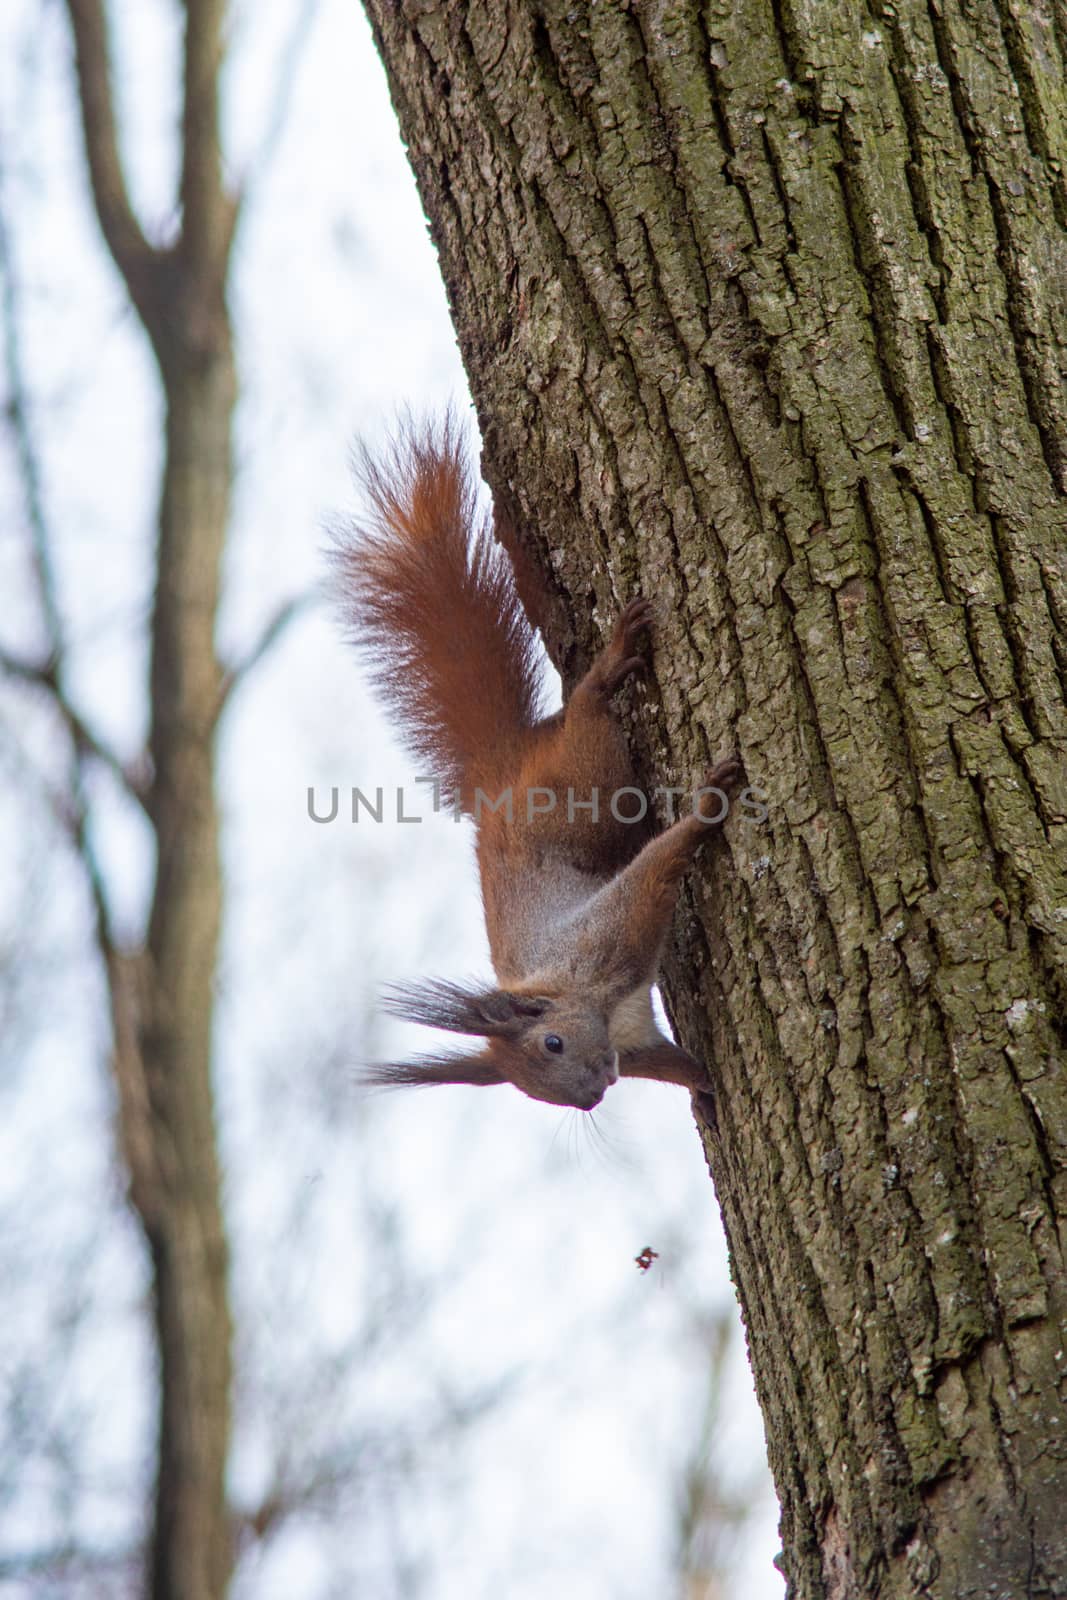 Squirrel hanging on the tree upside down holding the back of the tree by Serhii_Voroshchuk